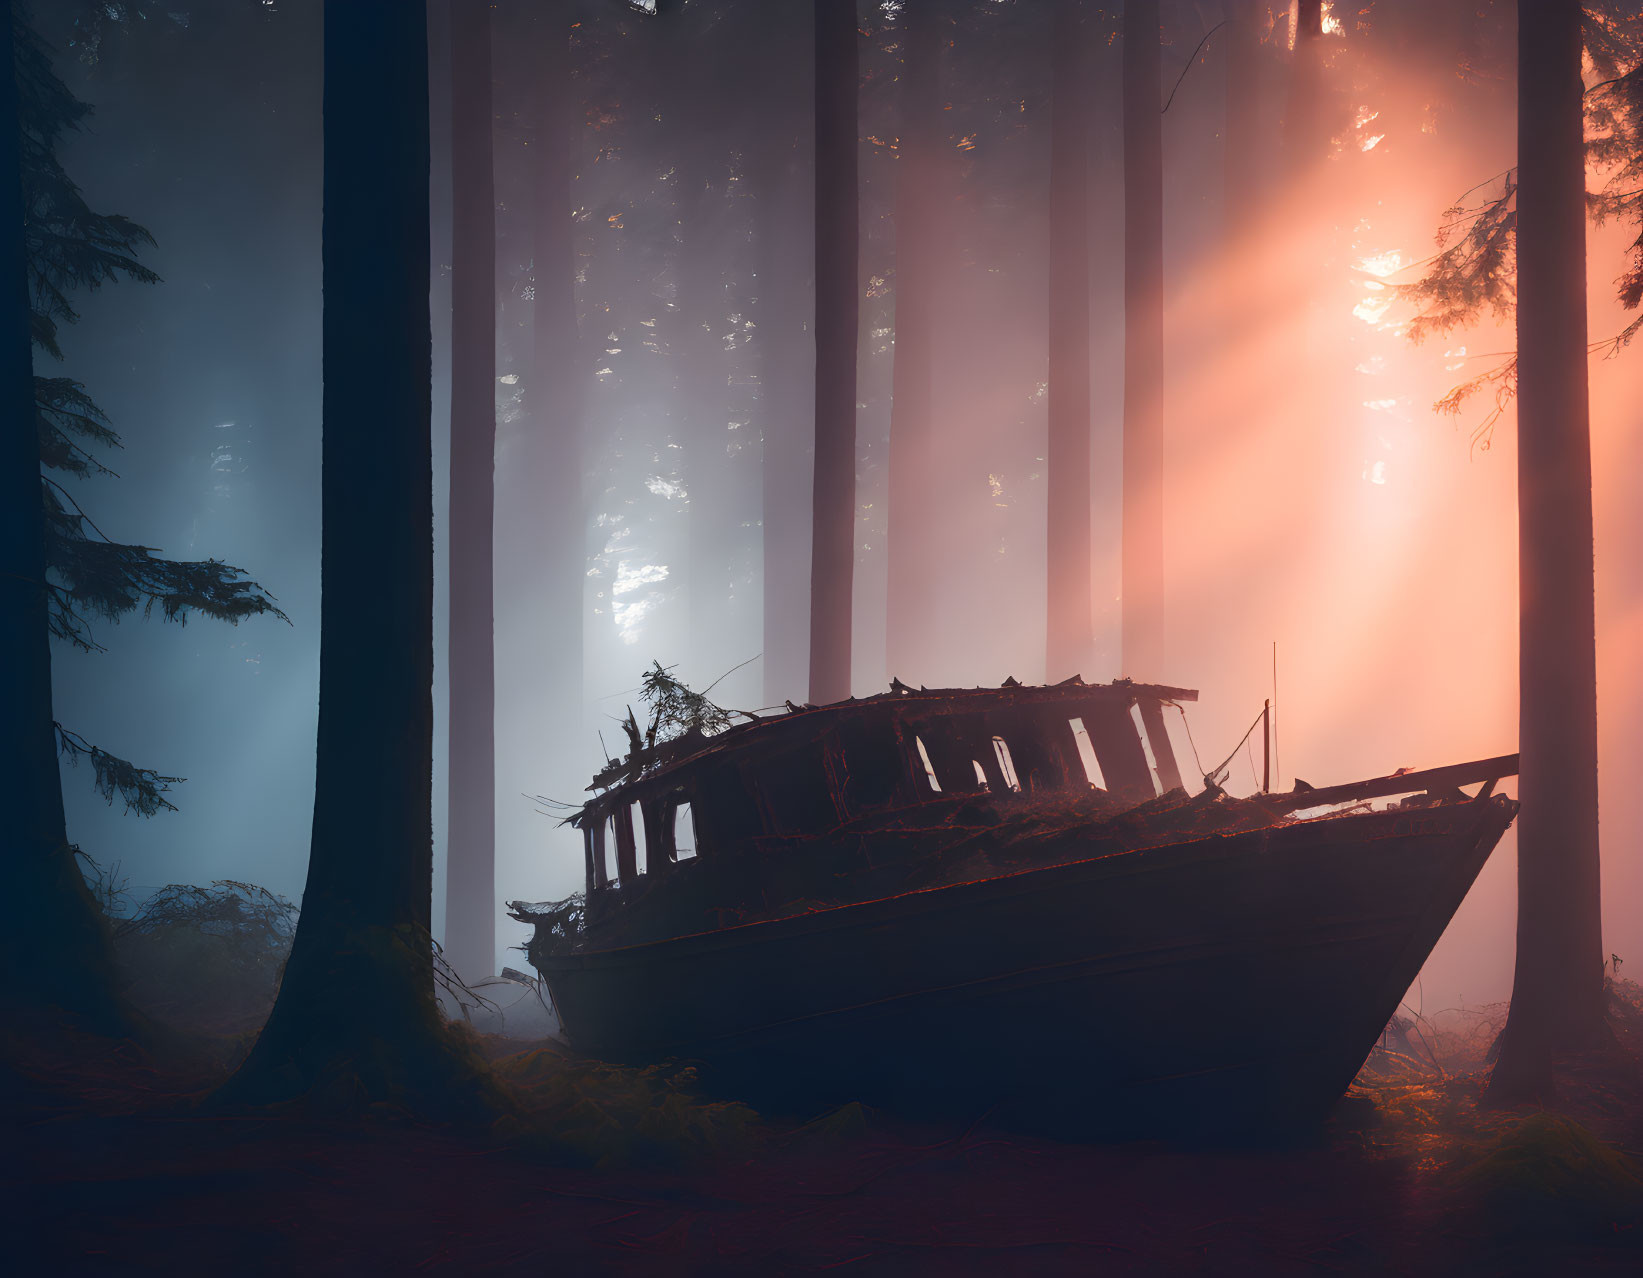 Abandoned boat in misty forest with sunbeams filtering through trees